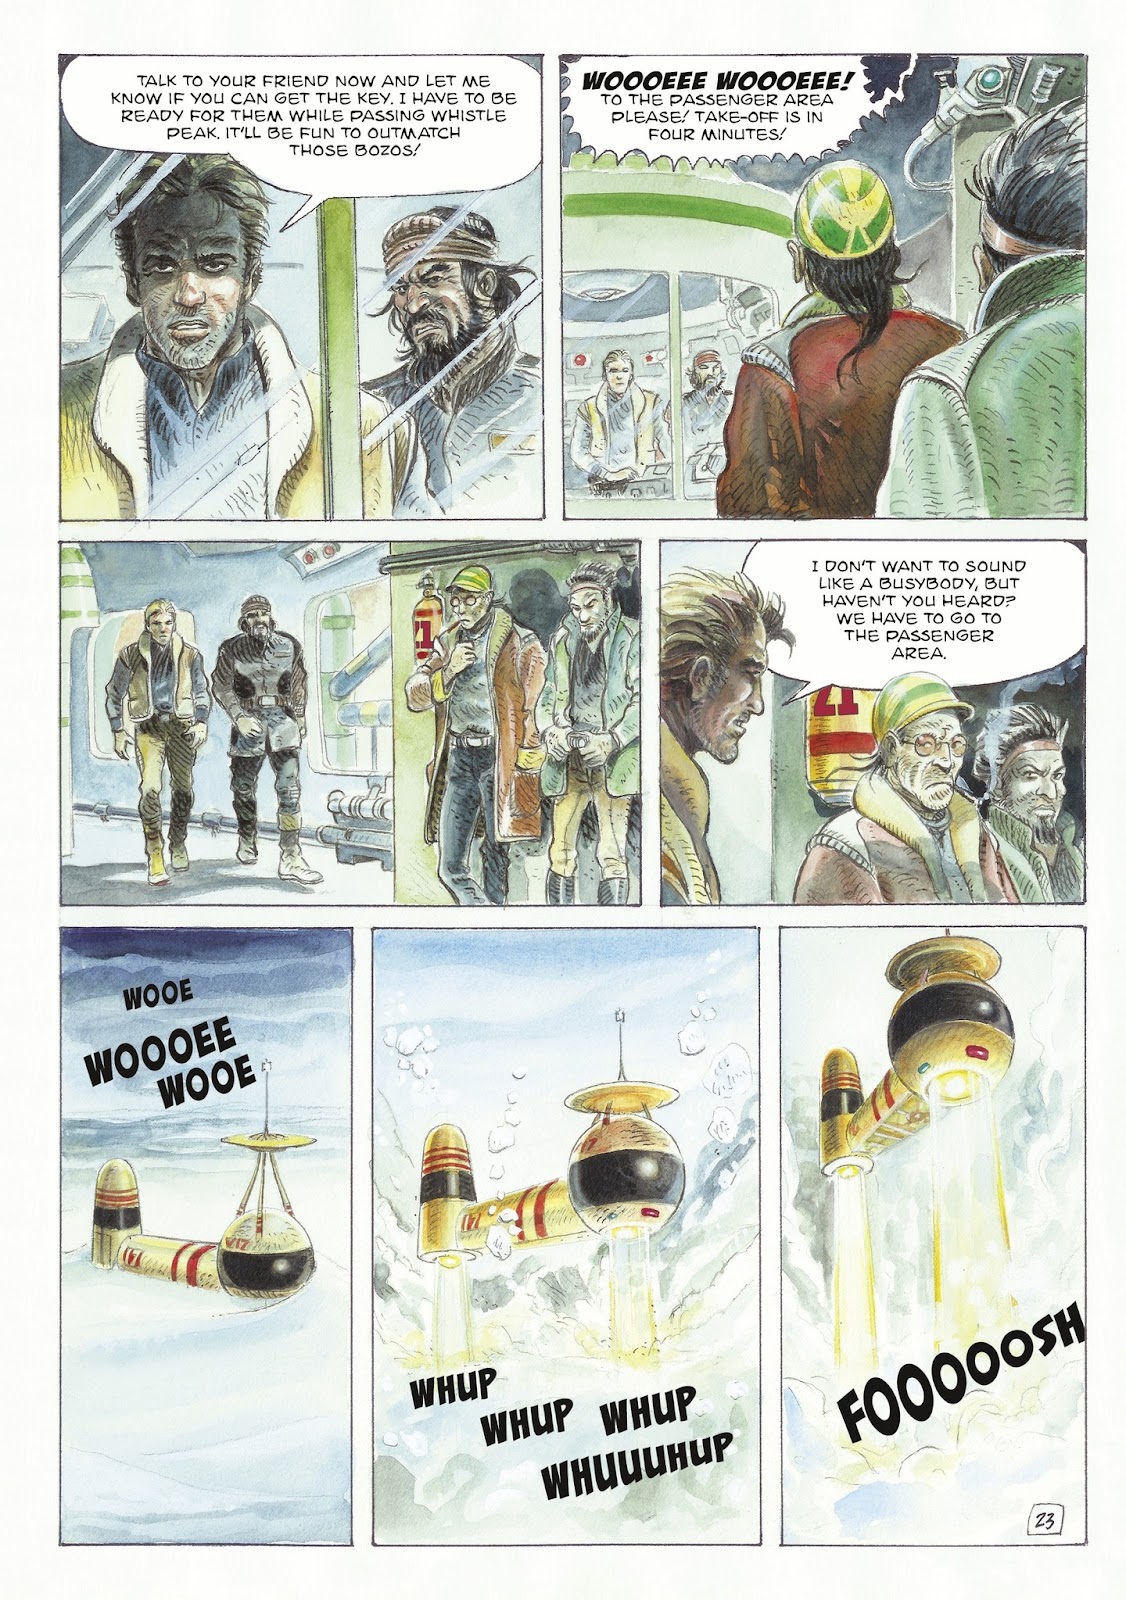 The Man With the Bear issue 1 - Page 25